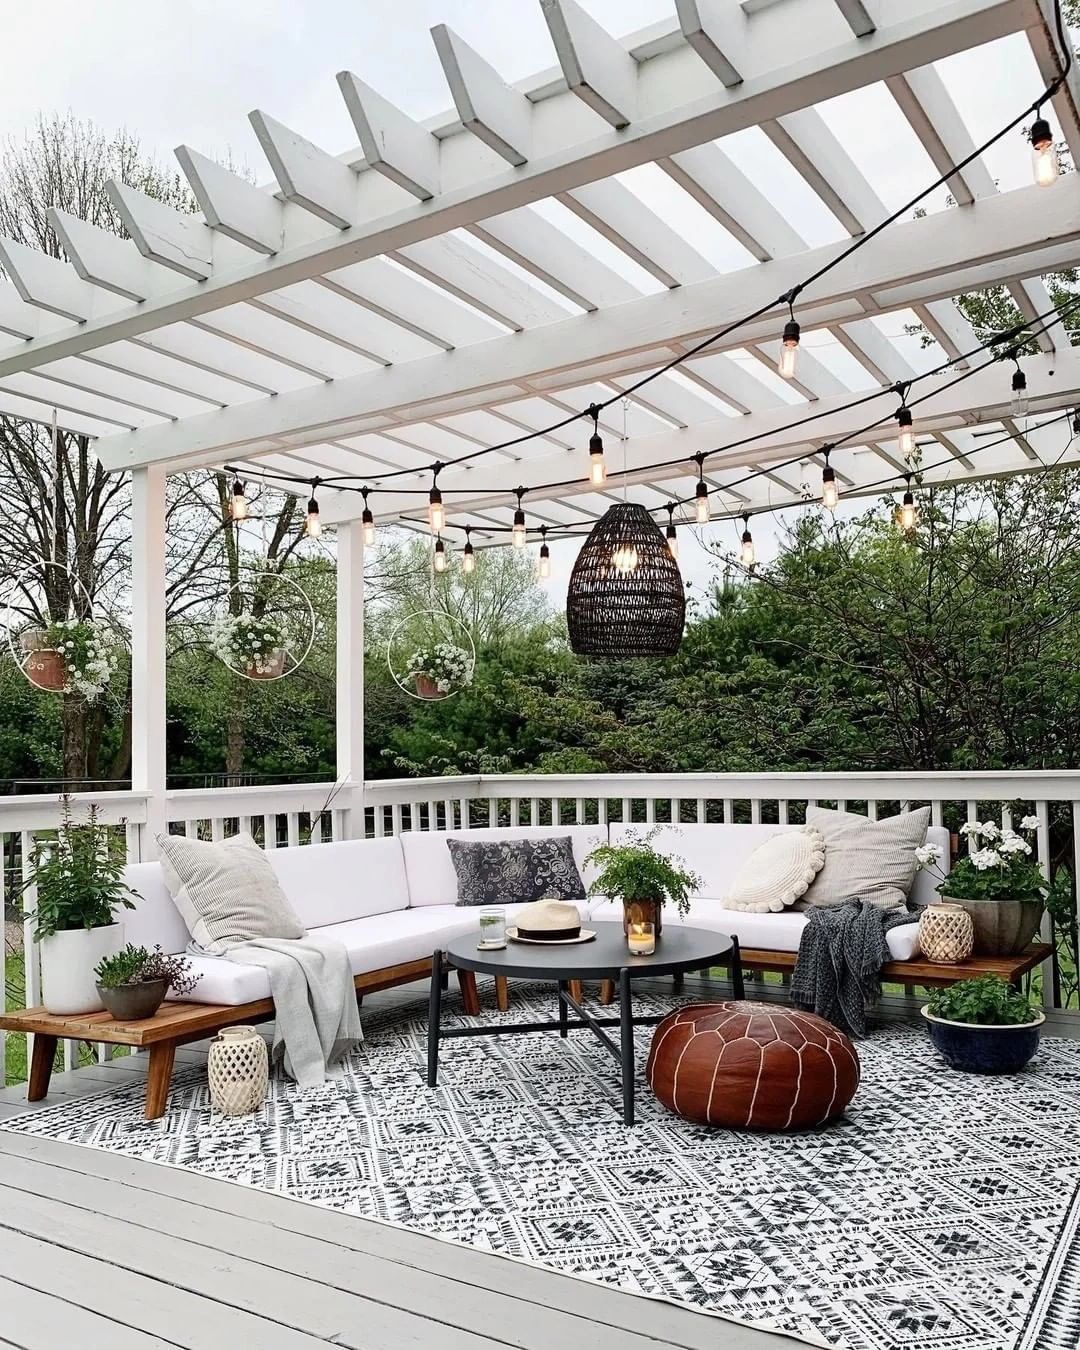 bright daytime outdoor space with white wooden pergola and black string lights. Photo by Instagram user @jmexsuss_us